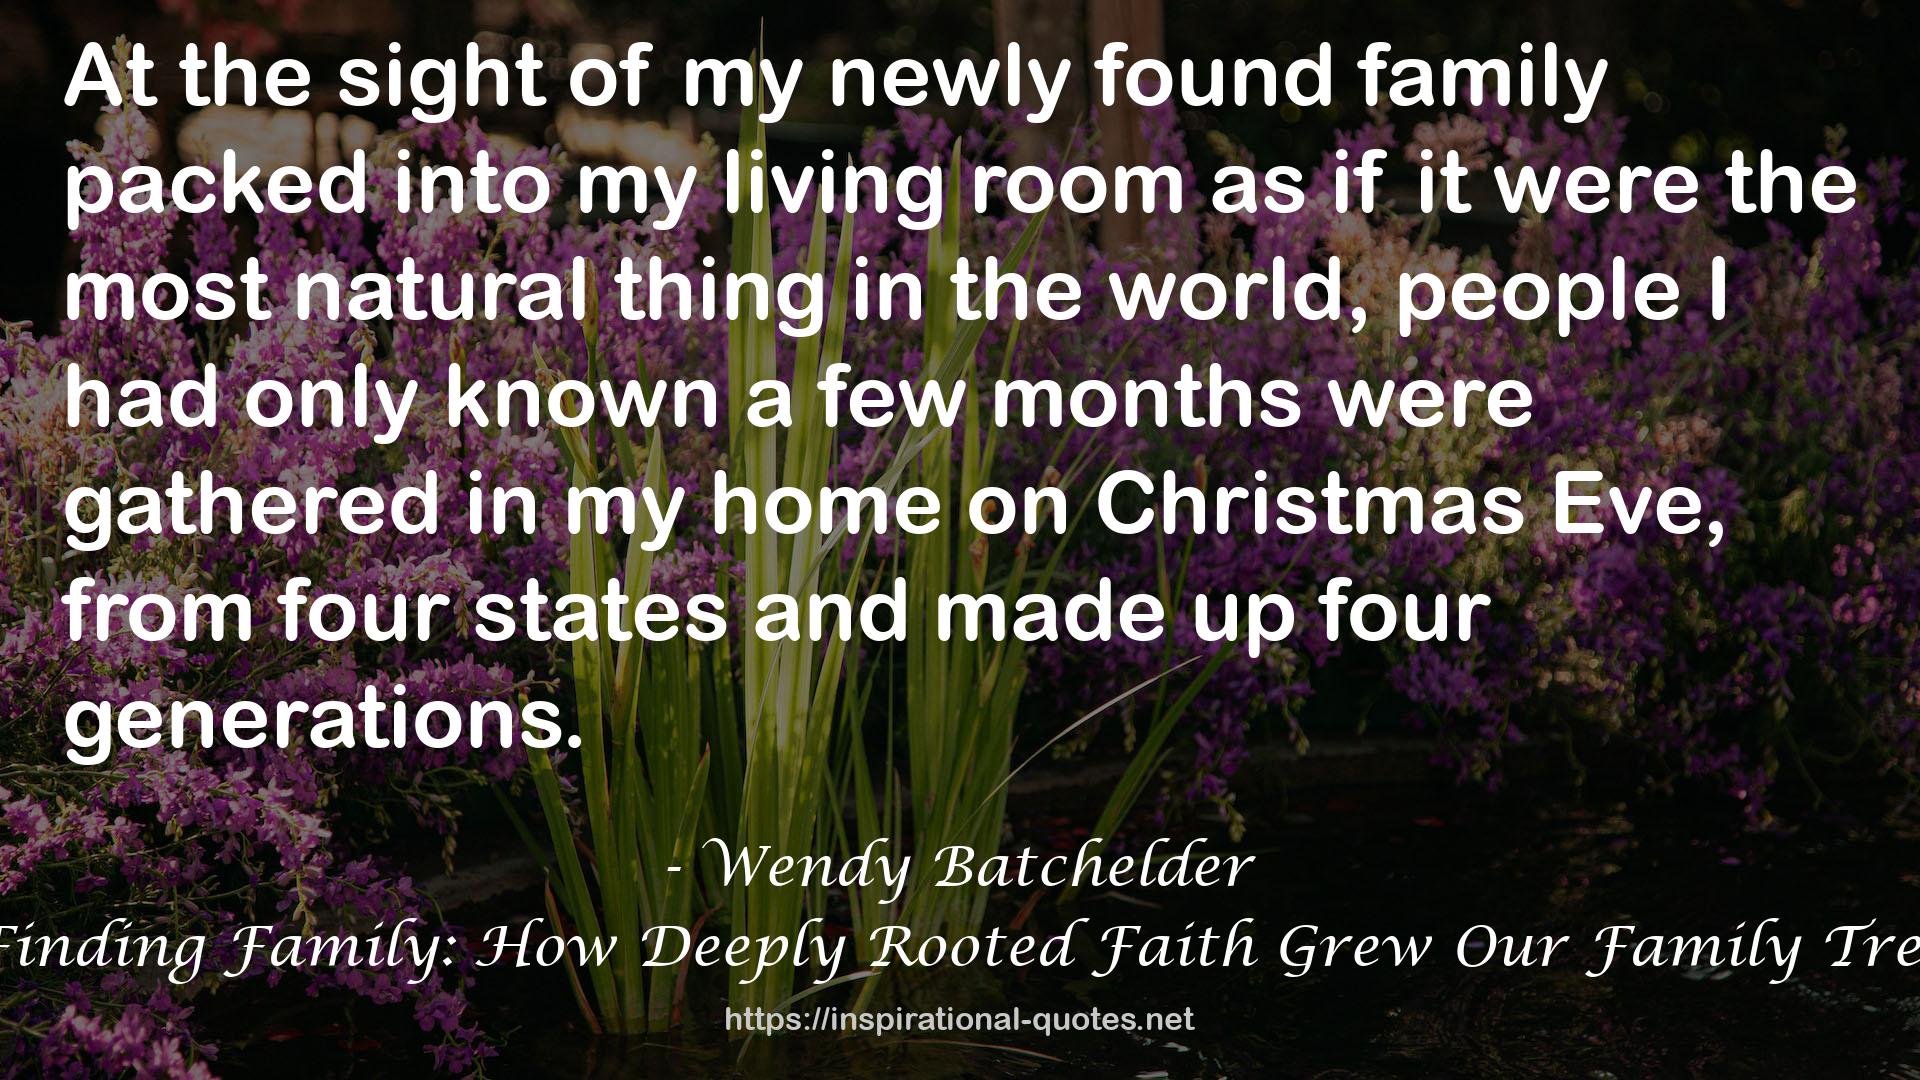 Finding Family: How Deeply Rooted Faith Grew Our Family Tree QUOTES